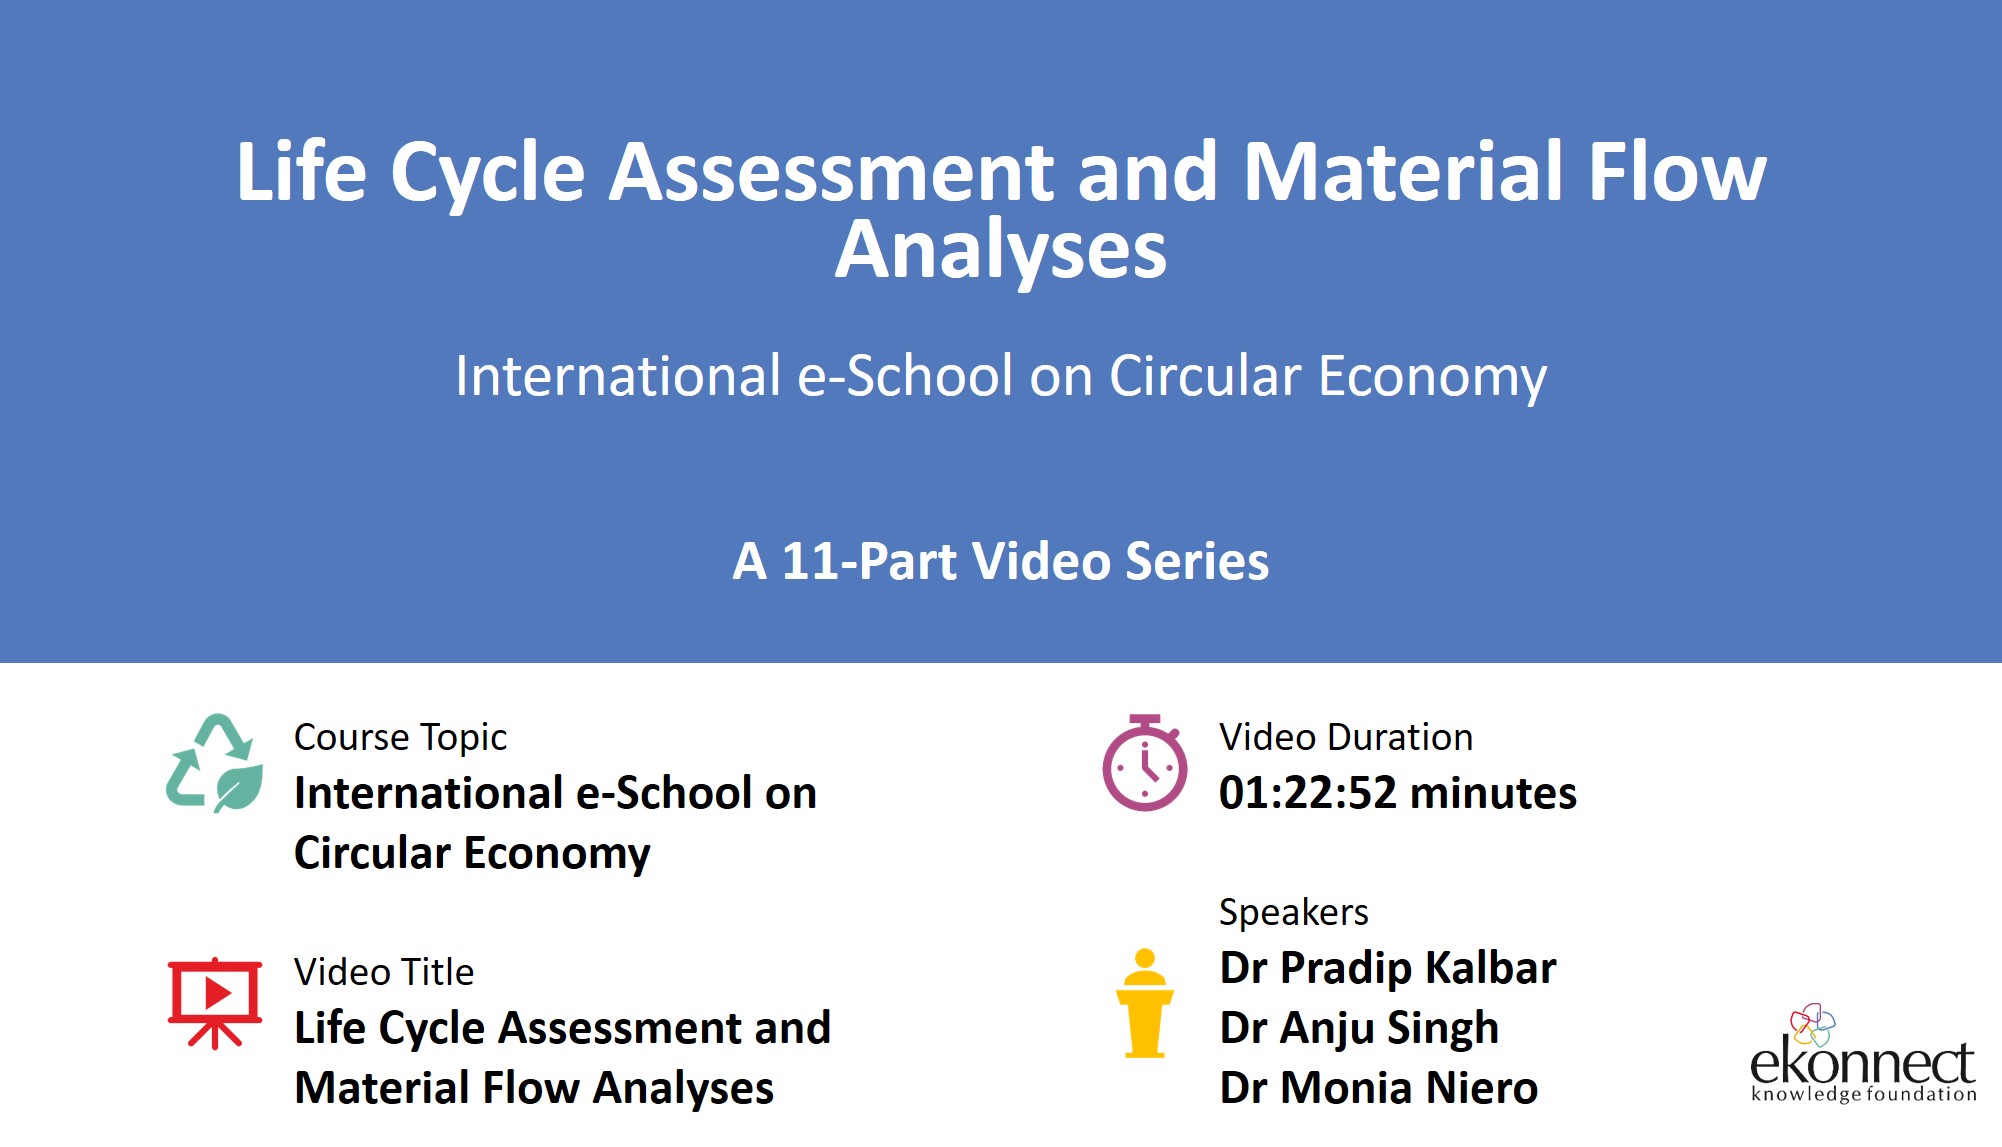 Life Cycle Assessment and Material Flow Analyses